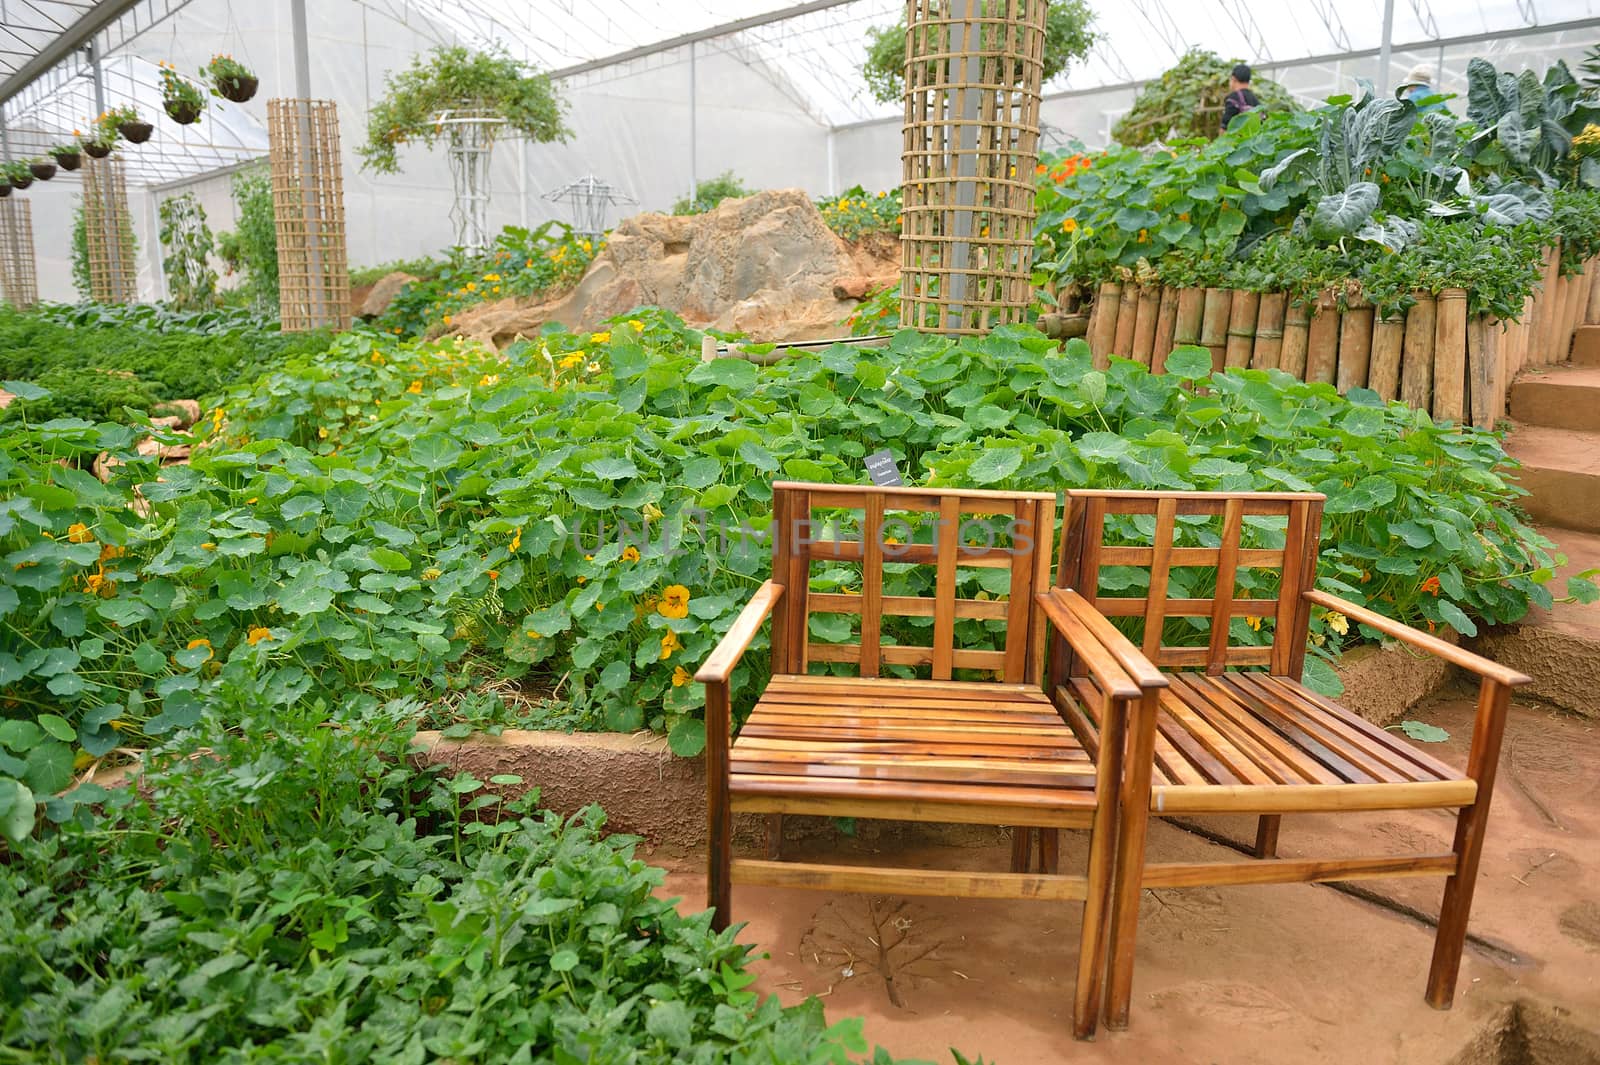 veggie plot in the garden at Doi Angkhang royal project, Chiangm by think4photop